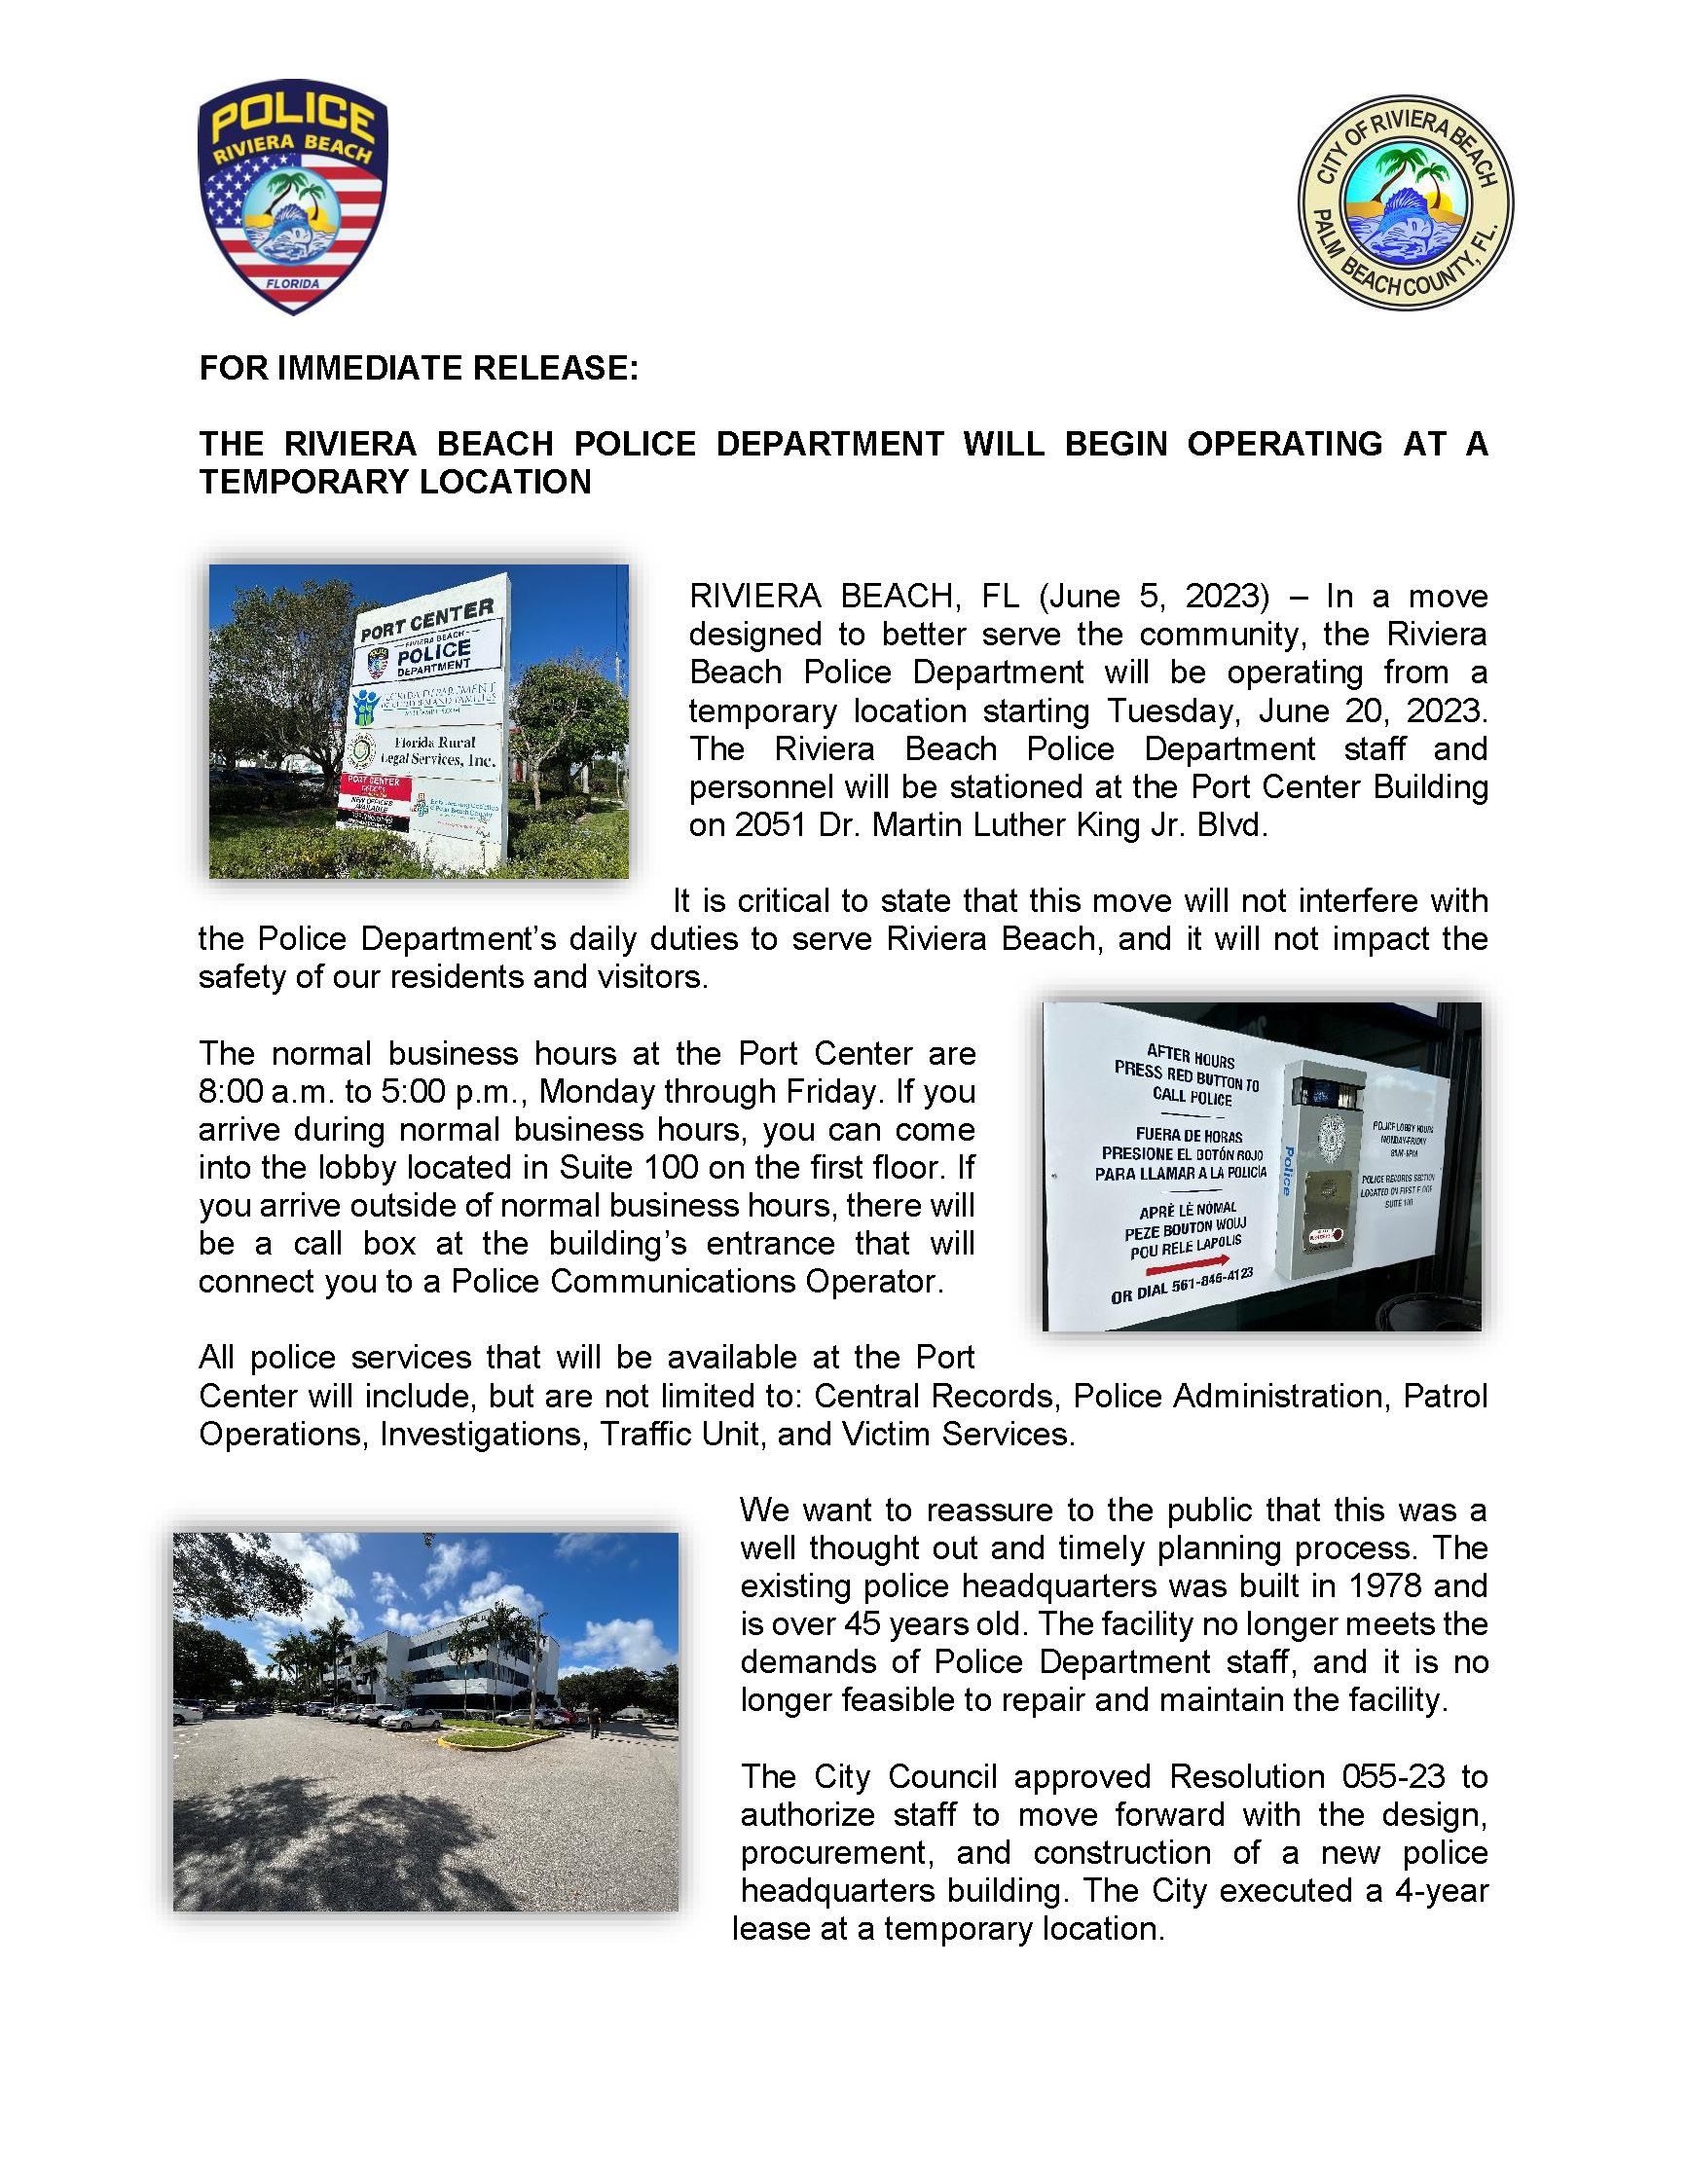 FOR IMMEDIATE RELEASE: THE RIVIERA BEACH POLICE DEPARTMENT WILL BEGIN OPERATING AT A TEMPORARY LOCATION RIVIERA BEACH, FL (June 5, 2023) – In a move designed to better serve the community, the Riviera Beach Police Department will be operating from a temporary location starting Tuesday, June 20, 2023. The Riviera Beach Police Department staff and personnel will be stationed at the Port Center Building on 2051 Dr. Martin Luther King Jr. Blvd. It is critical to state that this move will not interfere with the Police Department’s daily duties to serve Riviera Beach, and it will not impact the safety of our residents and visitors. The normal business hours at the Port Center are 8:00 a.m. to 5:00 p.m., Monday through Friday. If you arrive during normal business hours, you can come into the lobby located in Suite 100 on the first floor. If you arrive outside of normal business hours, there will be a call box at the building’s entrance that will connect you to a Police Communications Operator. All police services that will be available at the Port Center will include, but are not limited to: Central Records, Police Administration, Patrol Operations, Investigations, Traffic Unit, and Victim Services. We want to reassure to the public that this was a well thought out and timely planning process. The existing police headquarters was built in 1978 and is over 45 years old. The facility no longer meets the demands of Police Department staff, and it is no longer feasible to repair and maintain the facility. The City Council approved Resolution 055-23 to authorize staff to move forward with the design, procurement, and construction of a new police headquarters building. The City executed a 4-year lease at a temporary location.